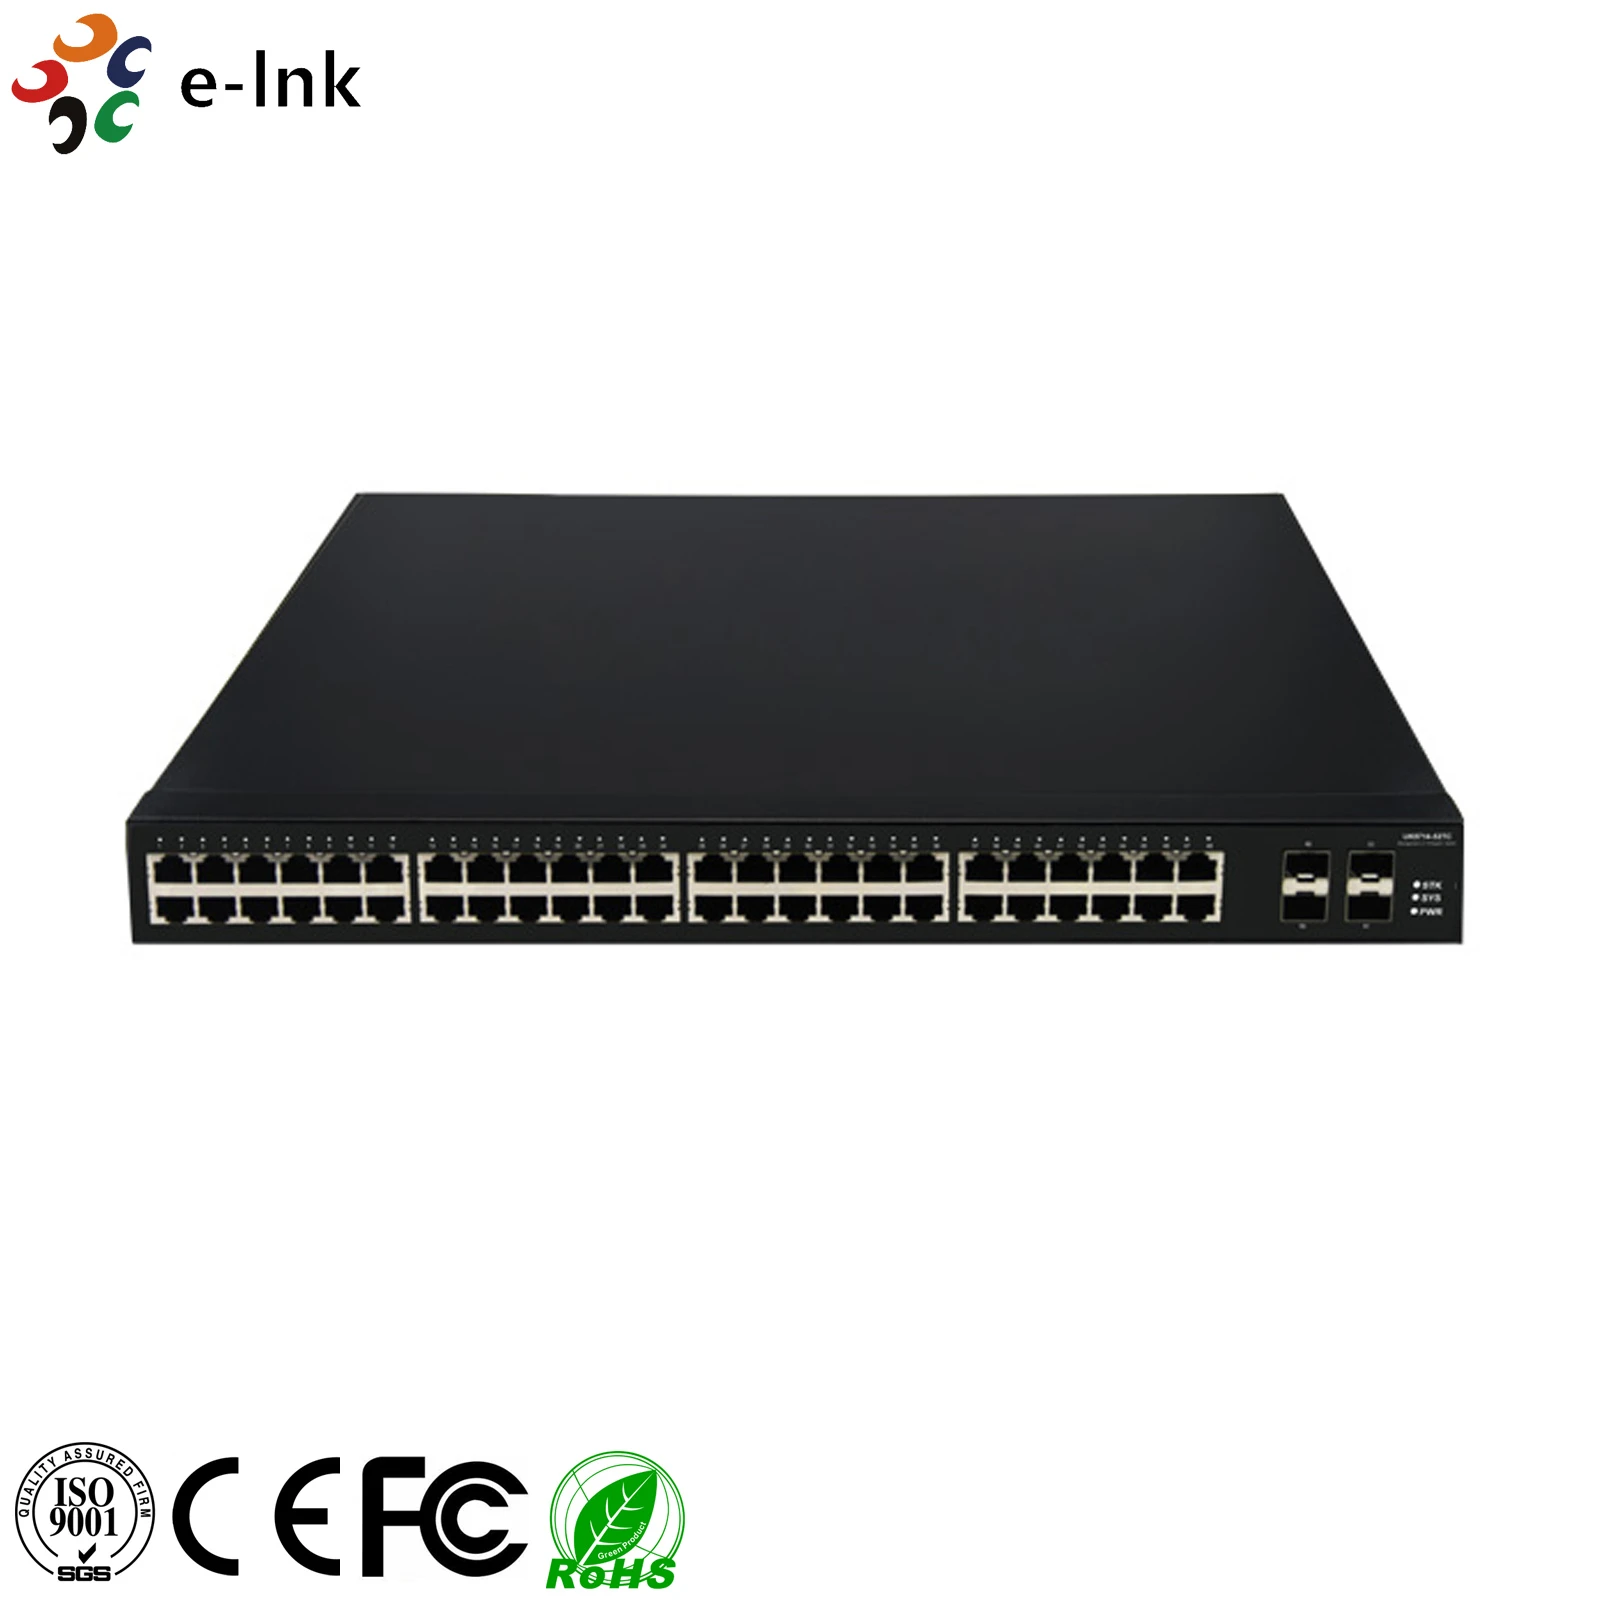 ftth fast connector L3 Managed 48-Port 10/100/1000BASE-T + 4-Port 10G SFP+ Gigabit Ethernet Switch ,Network Switch Support VLAN, STP/RSTP dual band wifi router